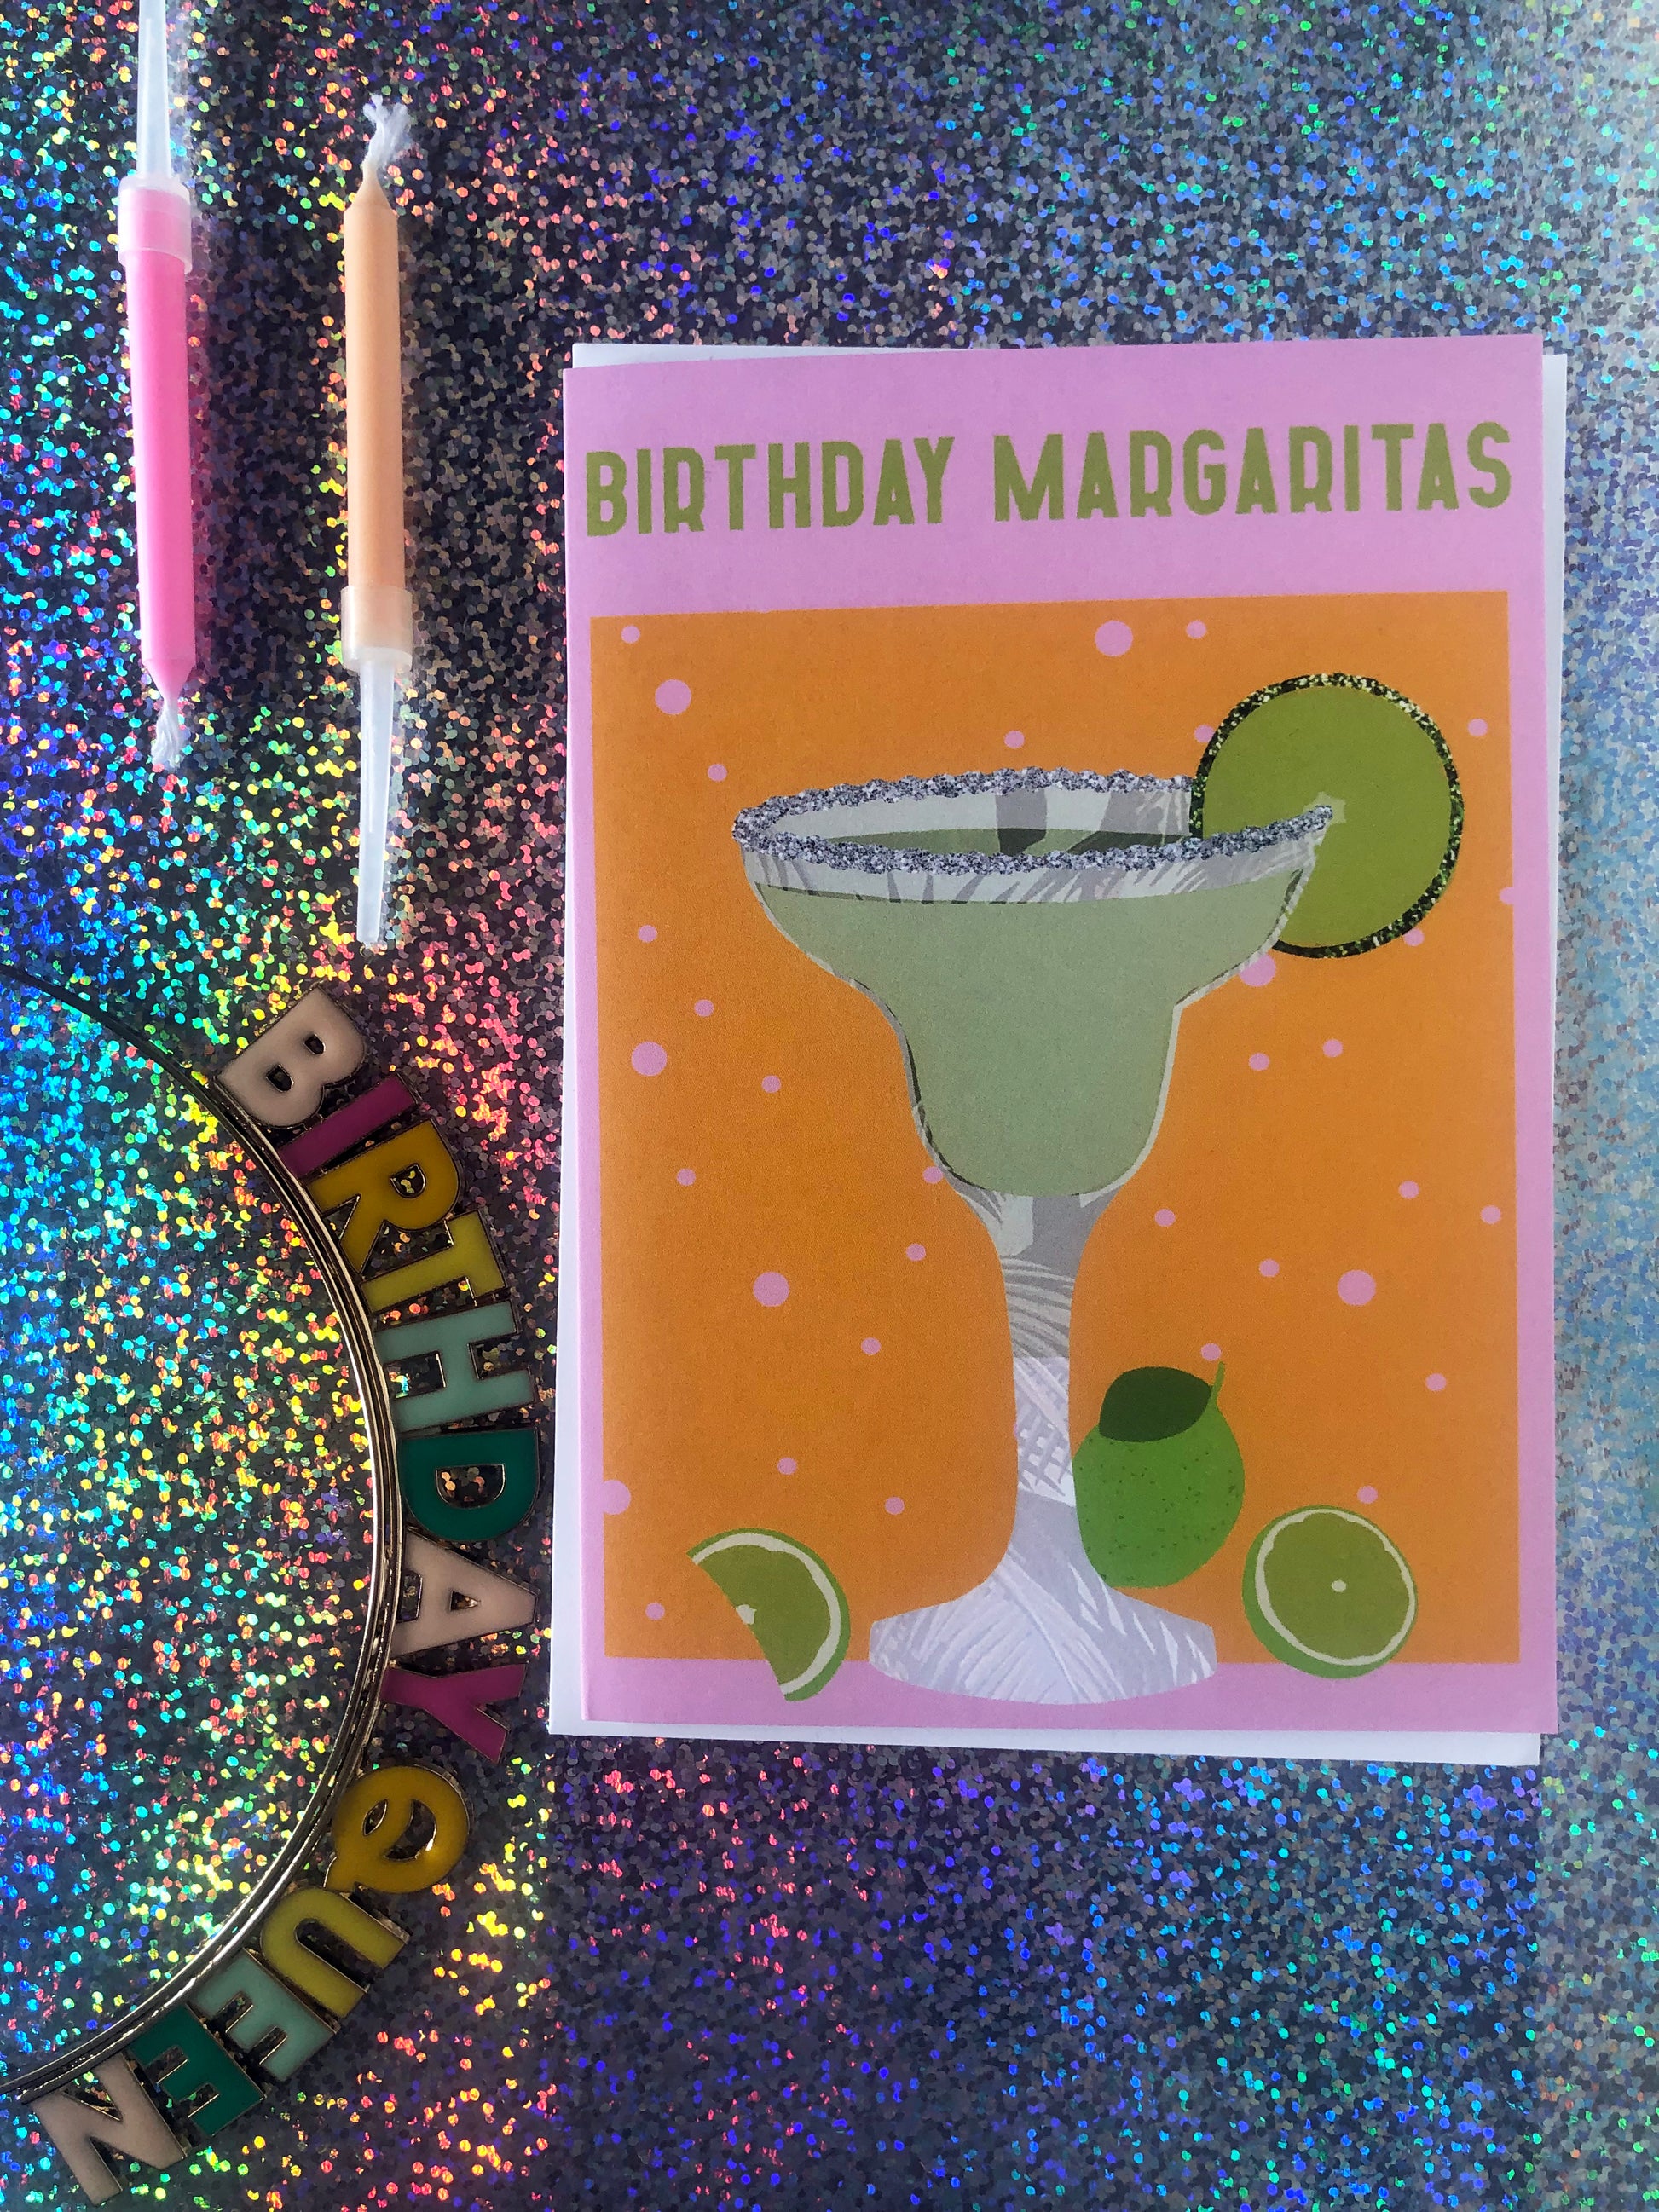 Bright and colourful birthday card featuring a margarita cocktail on a holographic background